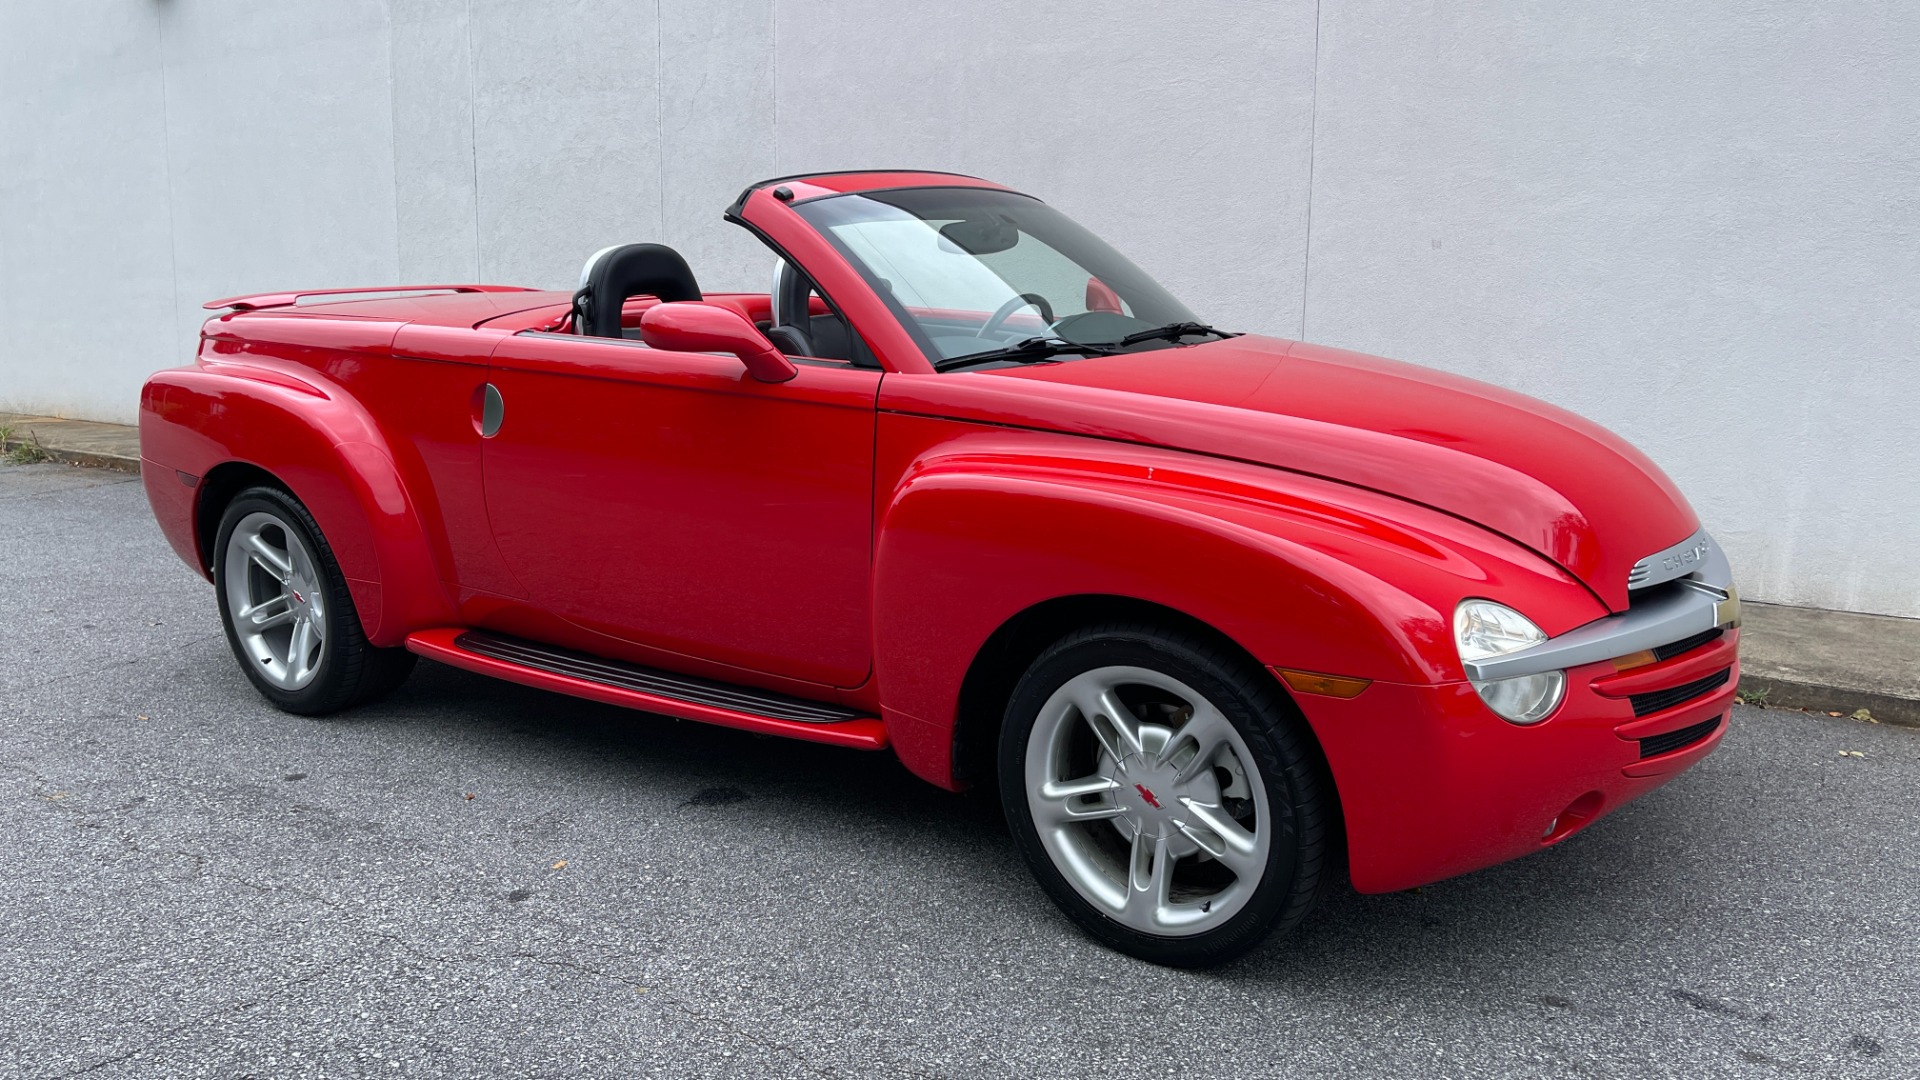 Used 2004 Chevrolet SSR LS / CONVERTIBLE / 5.3L V8 / LEATHER / HEATED SEATS / BACKUP CAMERA for sale Sold at Formula Imports in Charlotte NC 28227 7